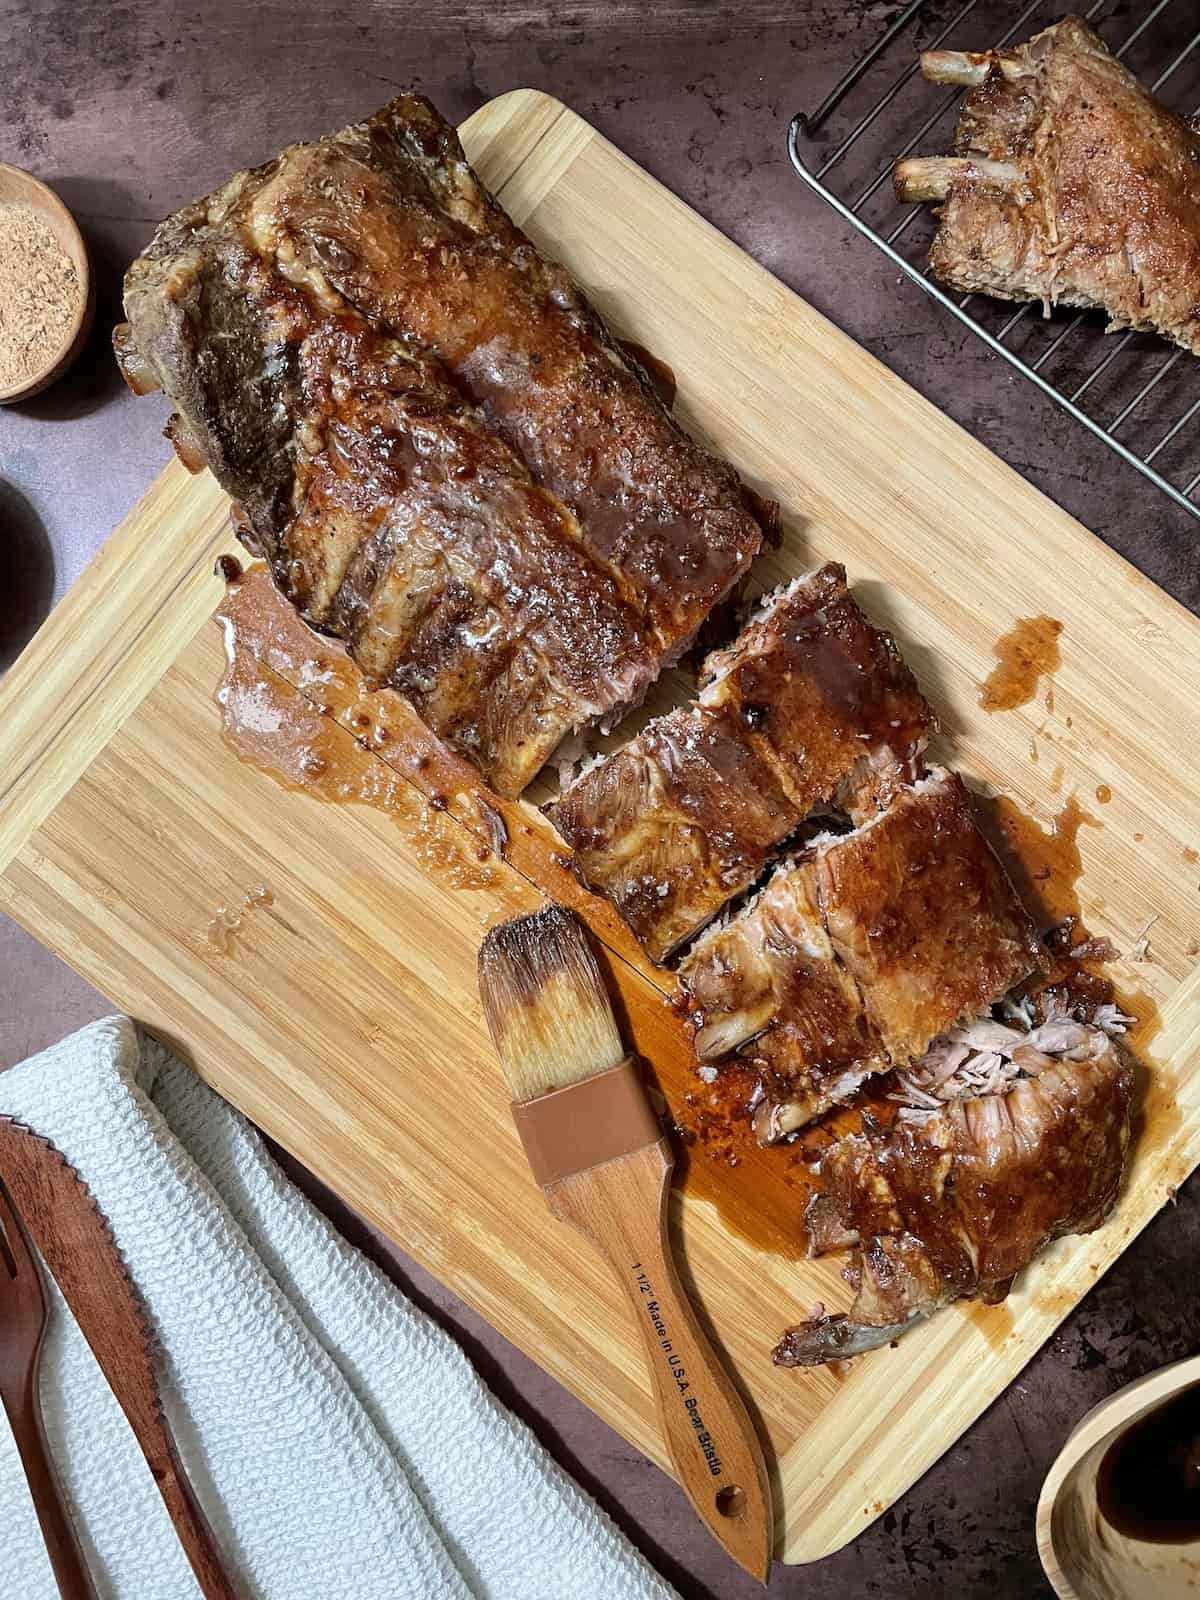 Guinness spare ribs with sauce on a wood cutting board with seasoning and sauce on the side.